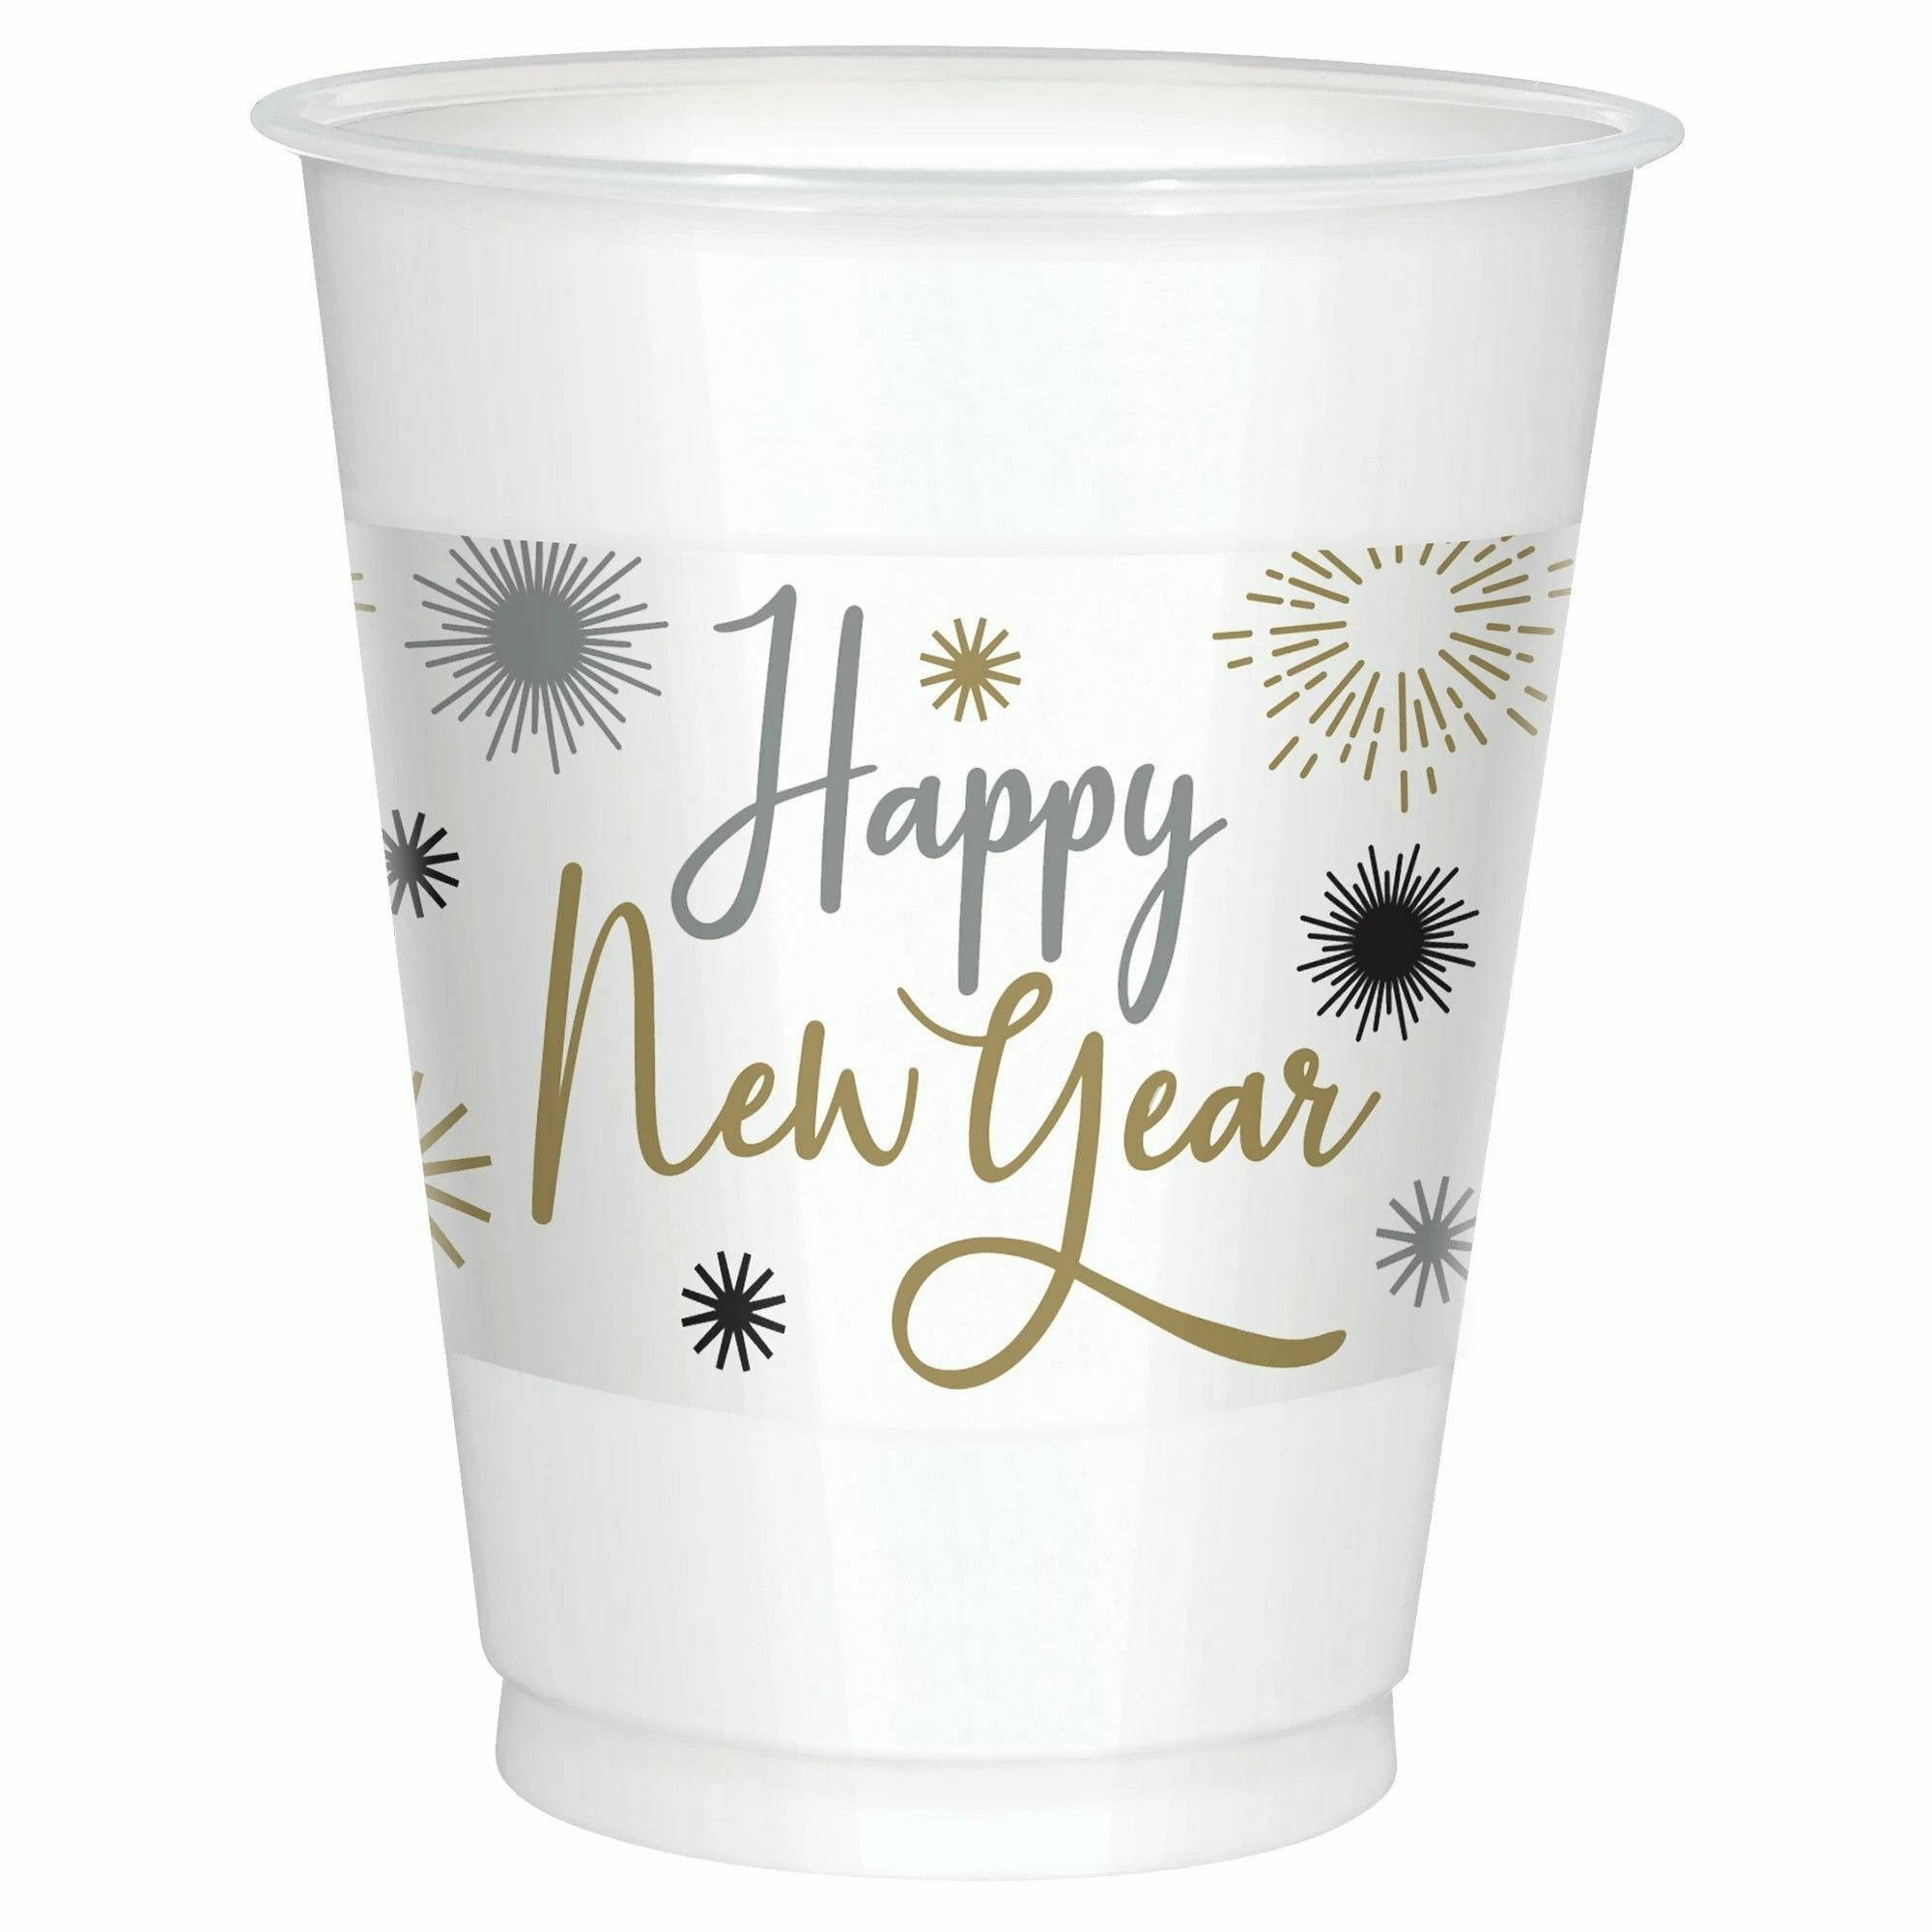 Amscan HOLIDAY: NEW YEAR'S Happy New Year Printed Plastic Cups - Black, Silver, Gold